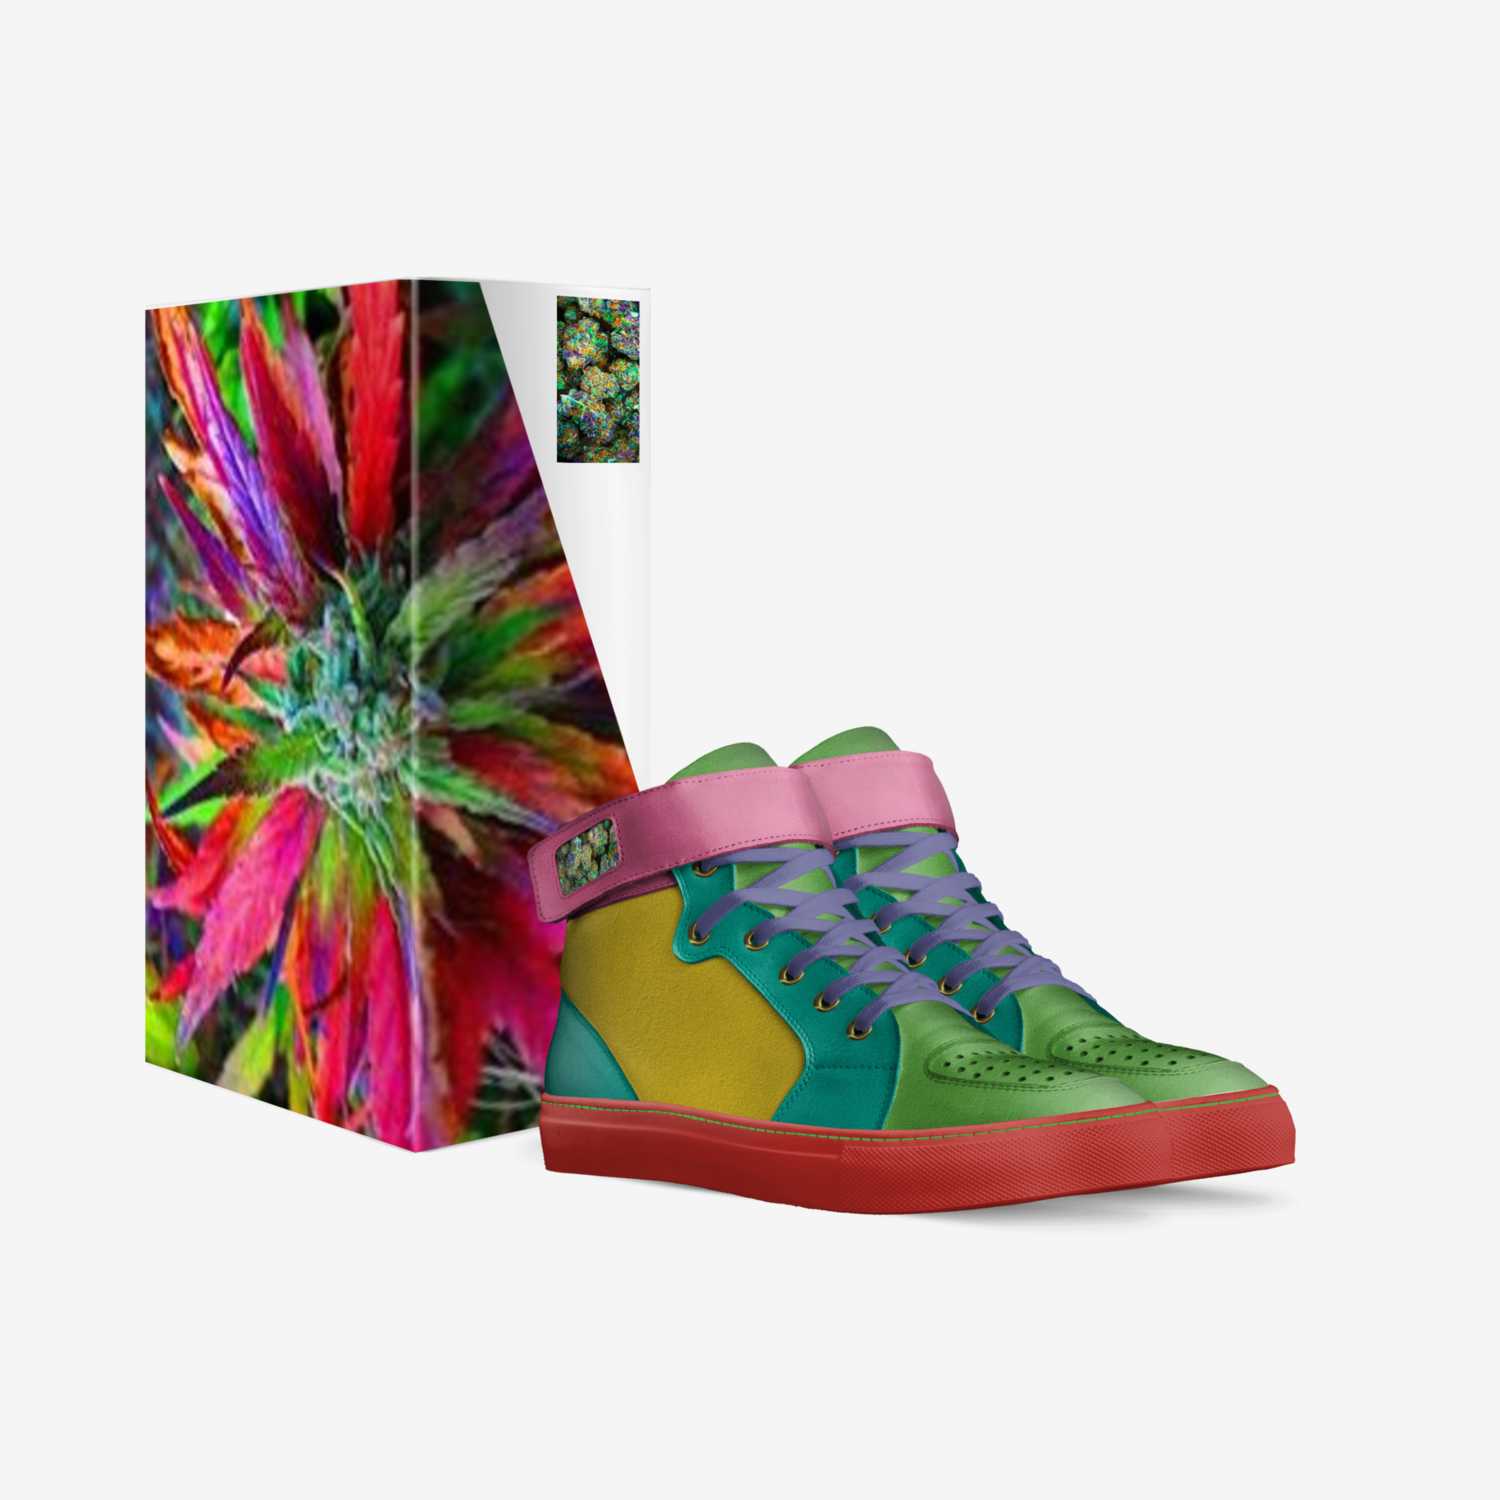 Canna-Juana Gear custom made in Italy shoes by Franswa Andre | Box view